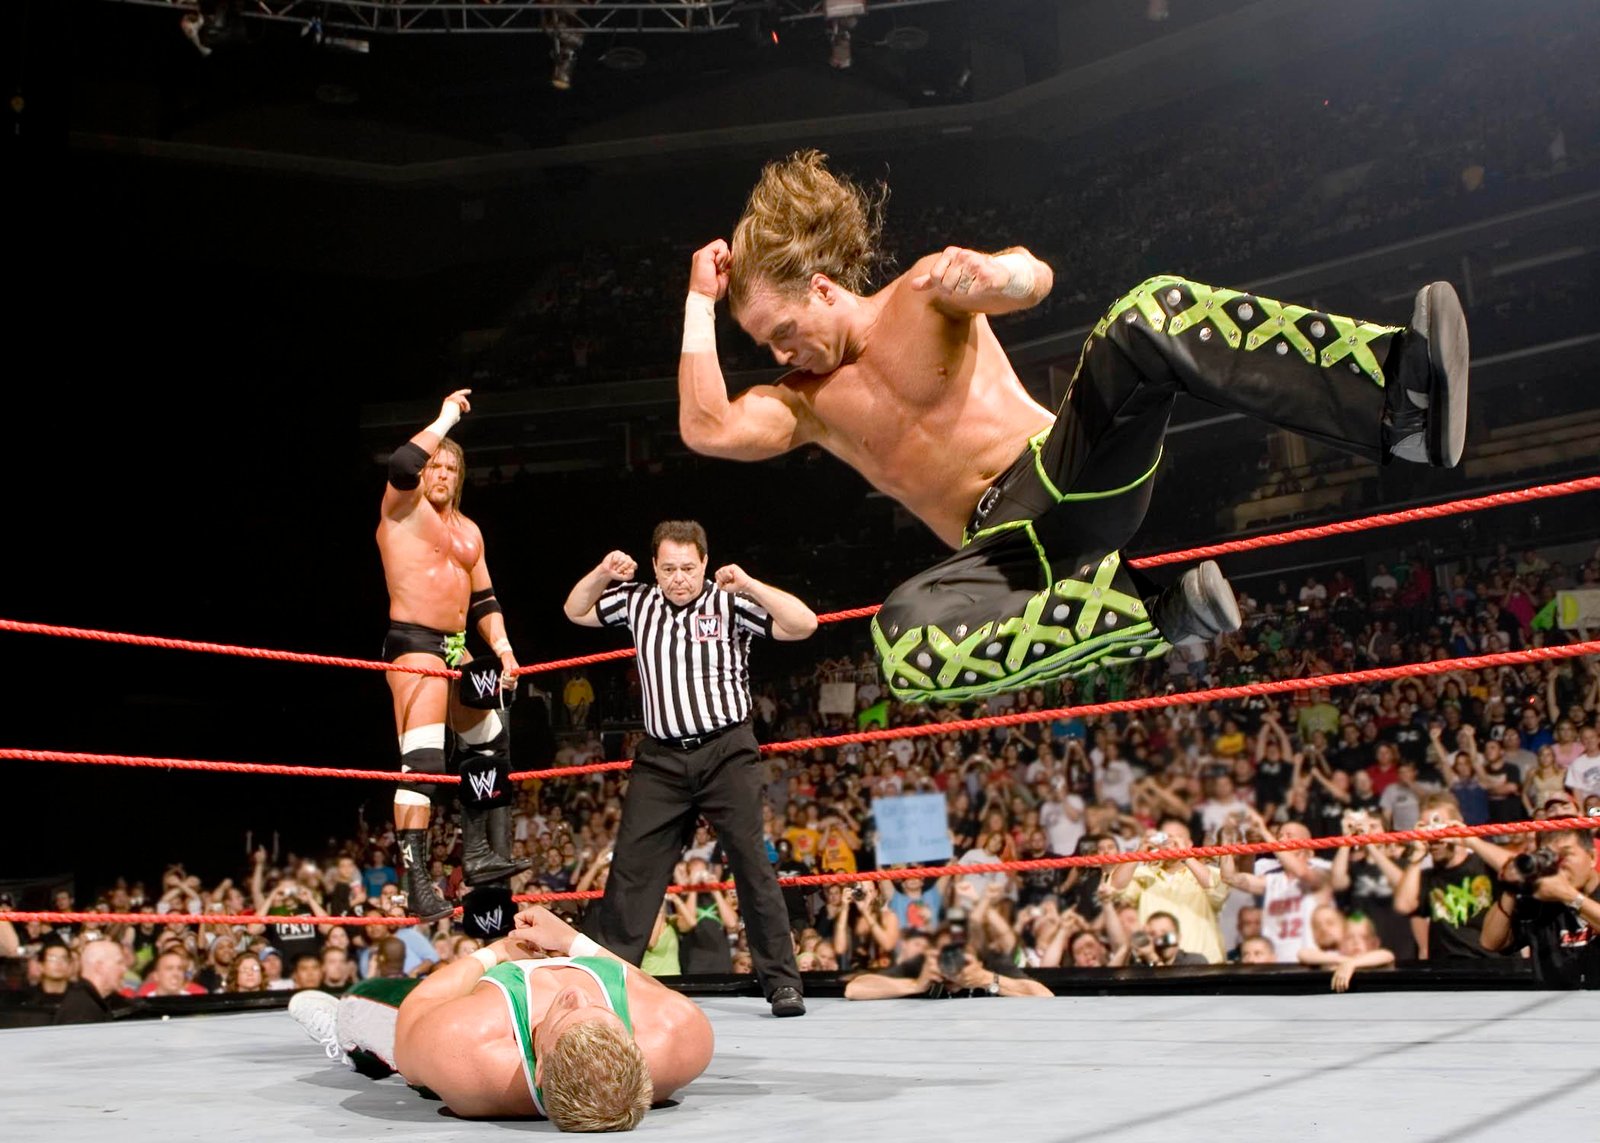 Shawn Michaels giving a huge elbow drop to a member of spirit squad.